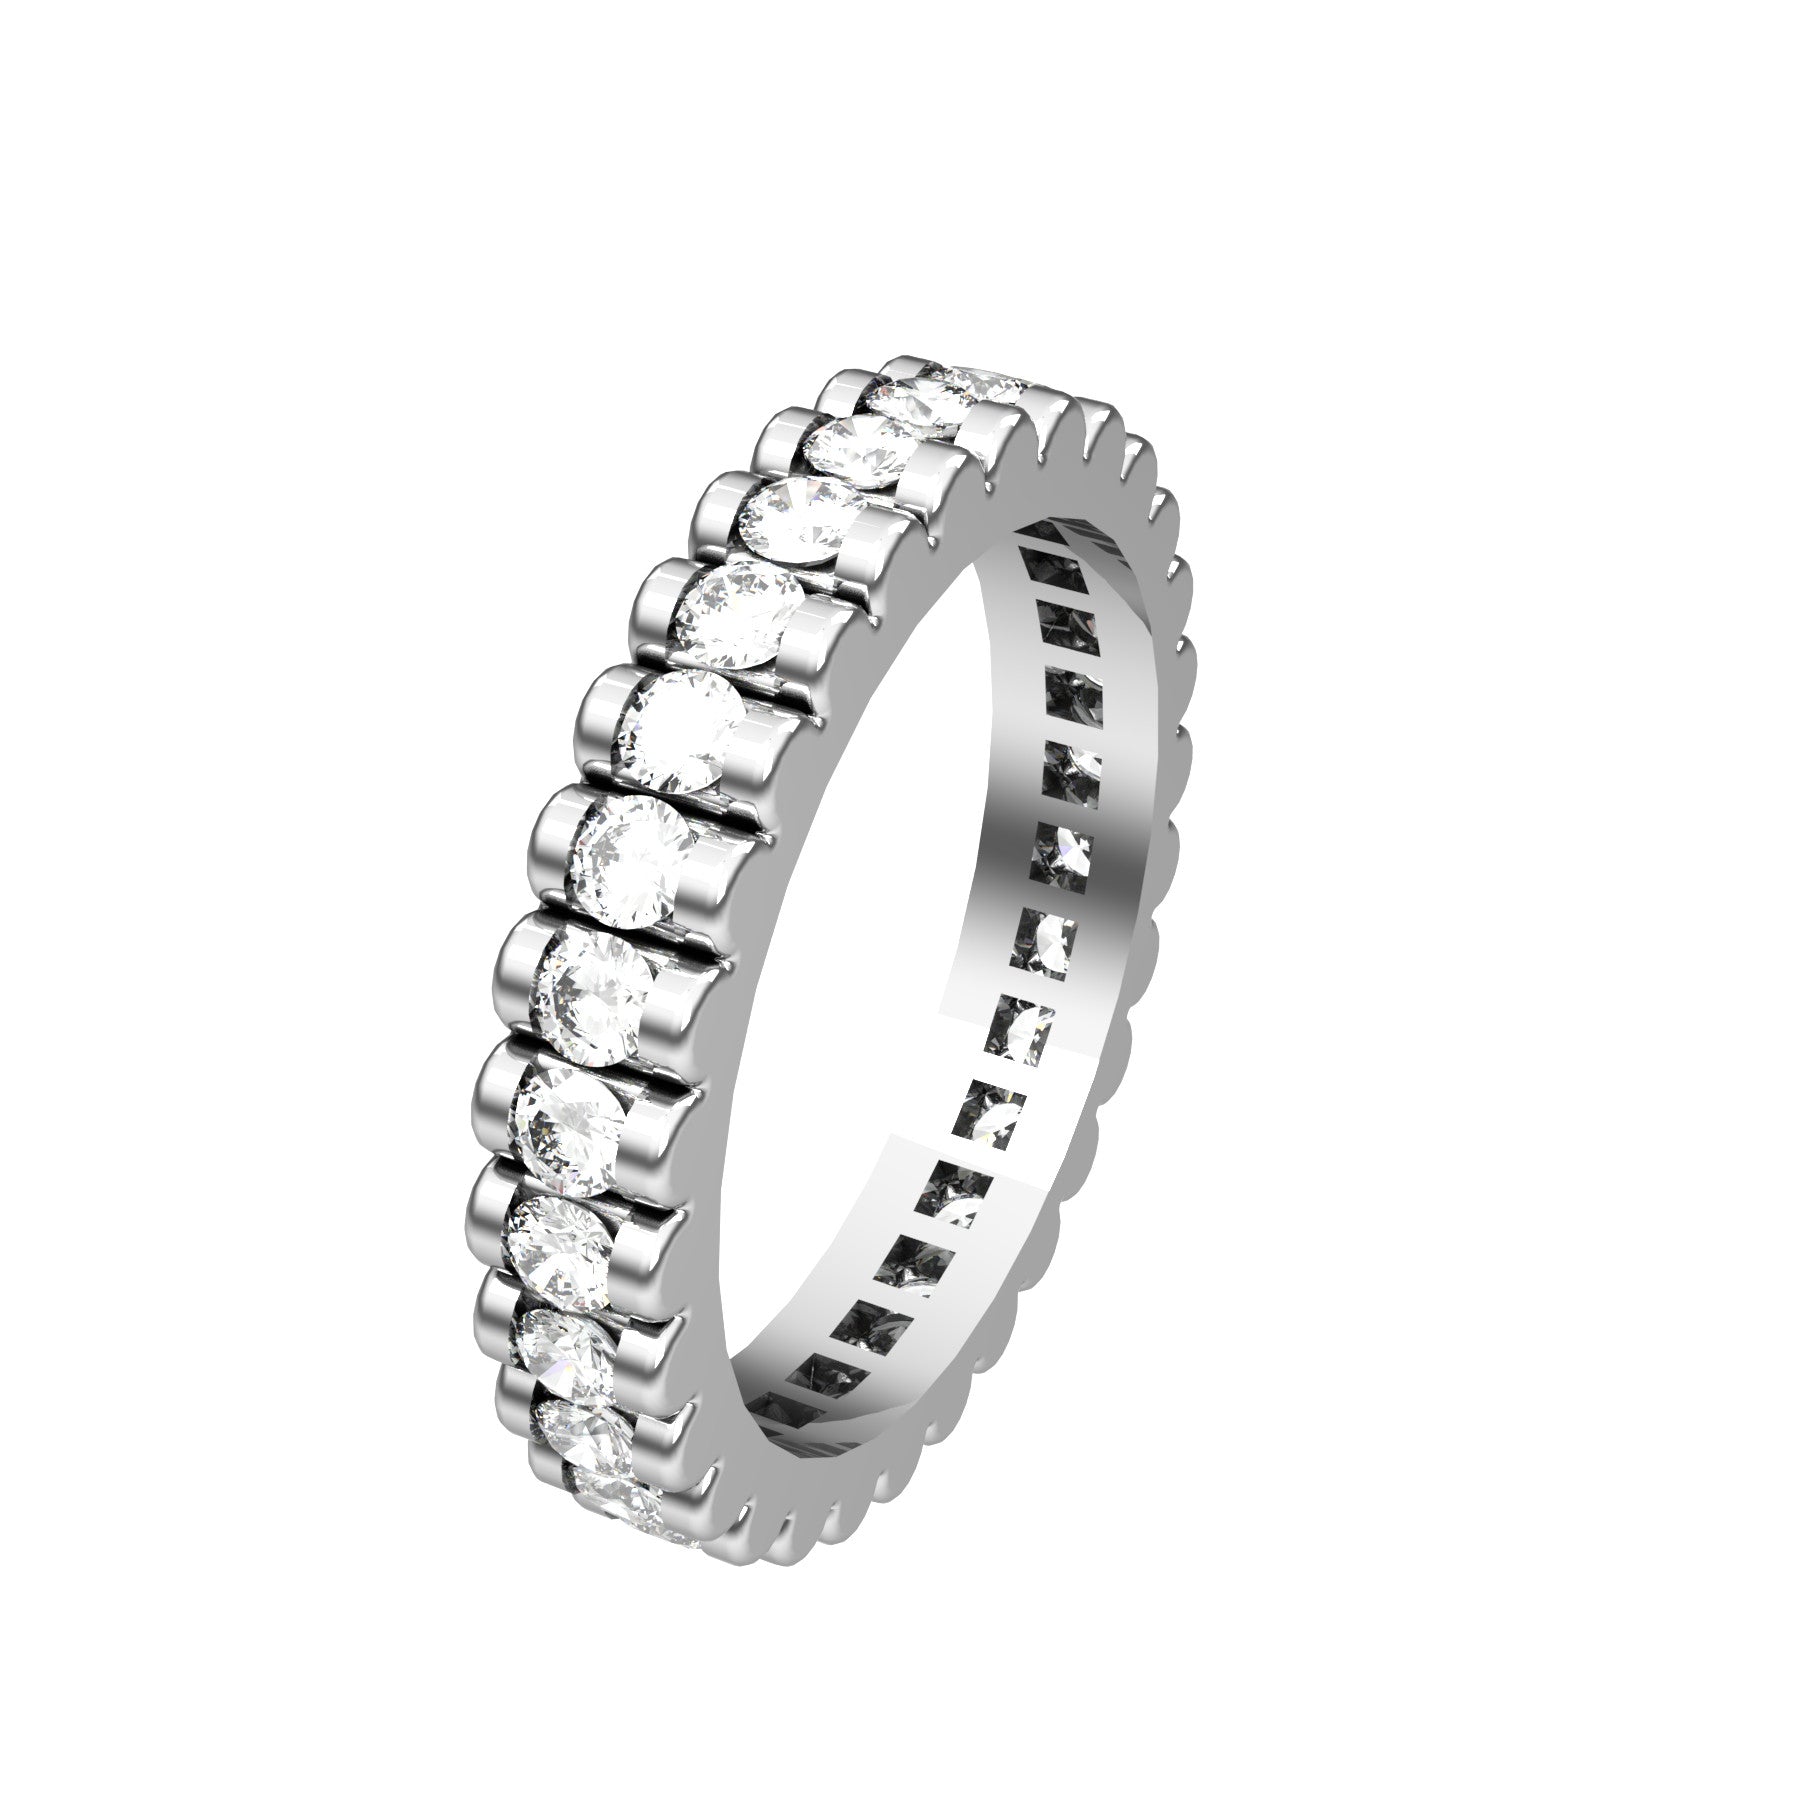 loving flower wedding band, 18 k white gold, 0,03 ct round natural diamonds, weight about 3,8 g. (0.13 oz), width 3,5 mm